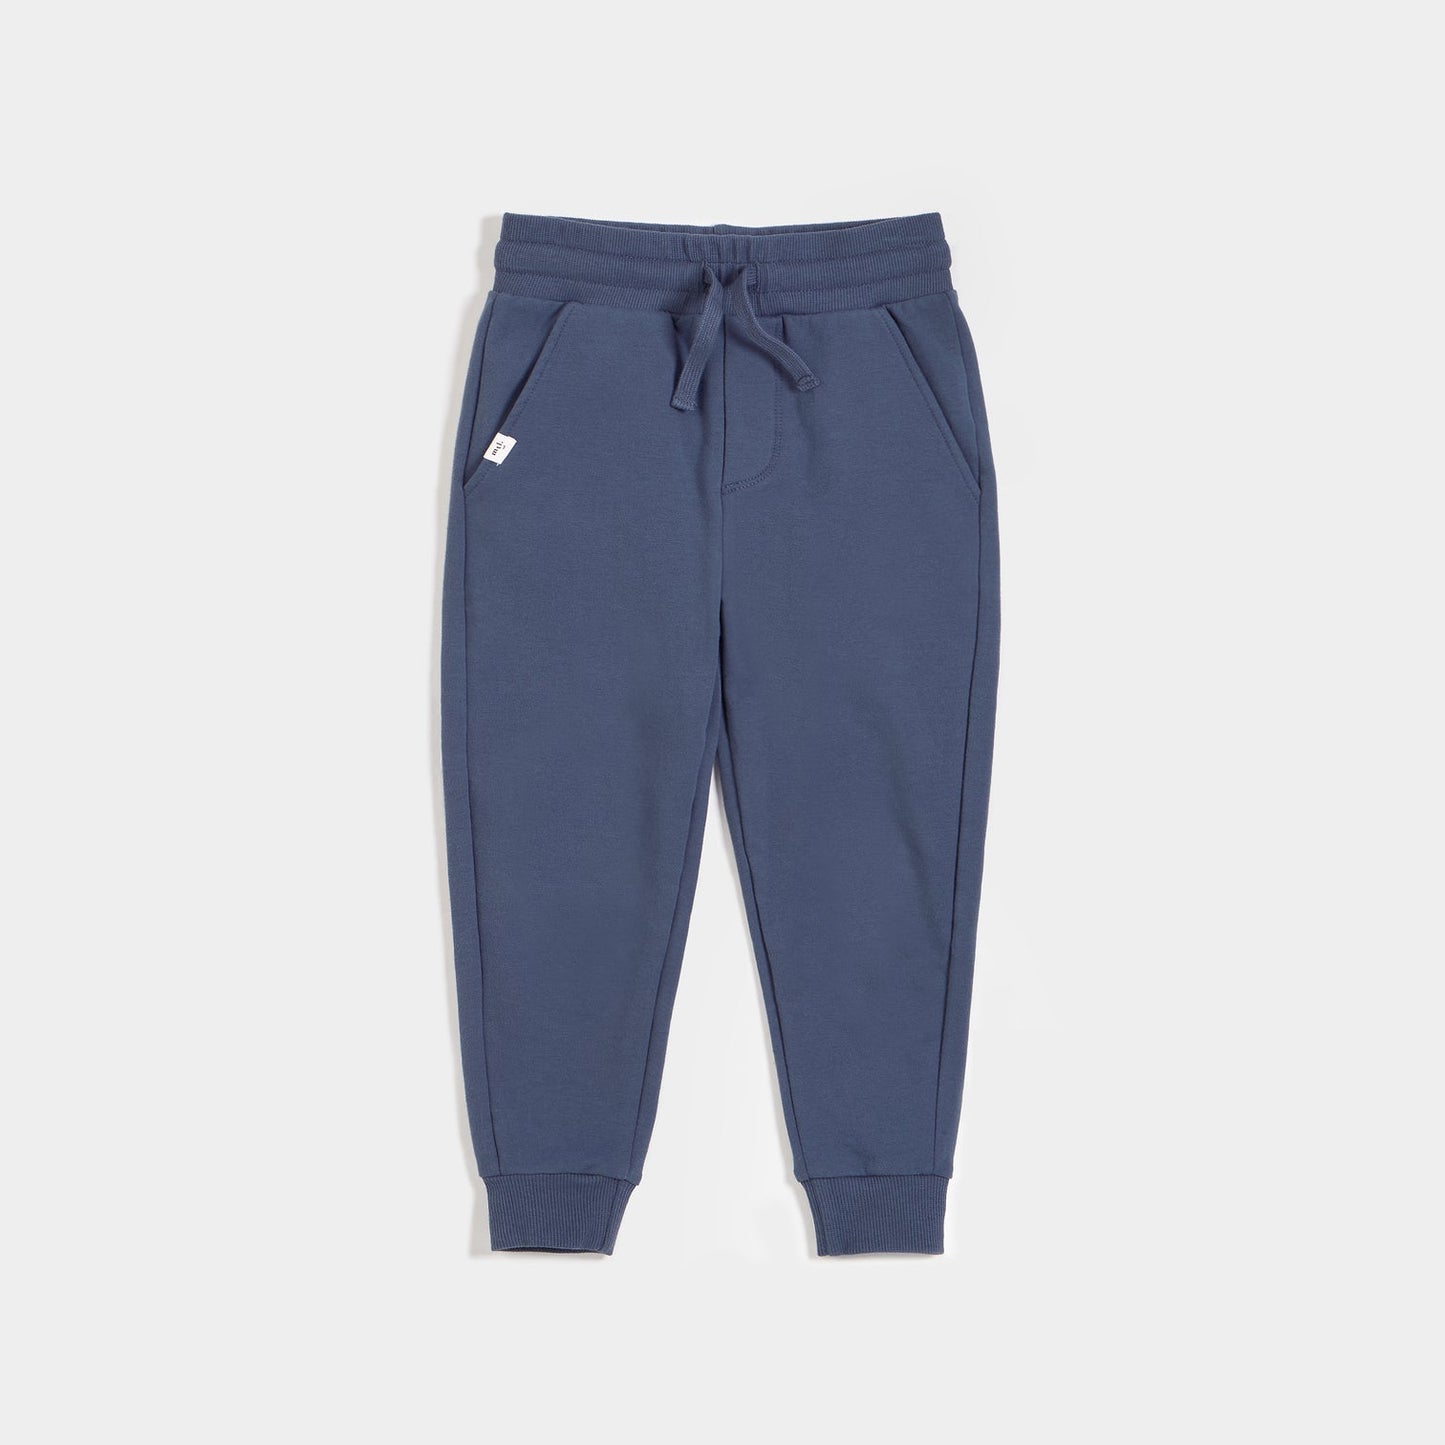 Miles the Label kids jogger